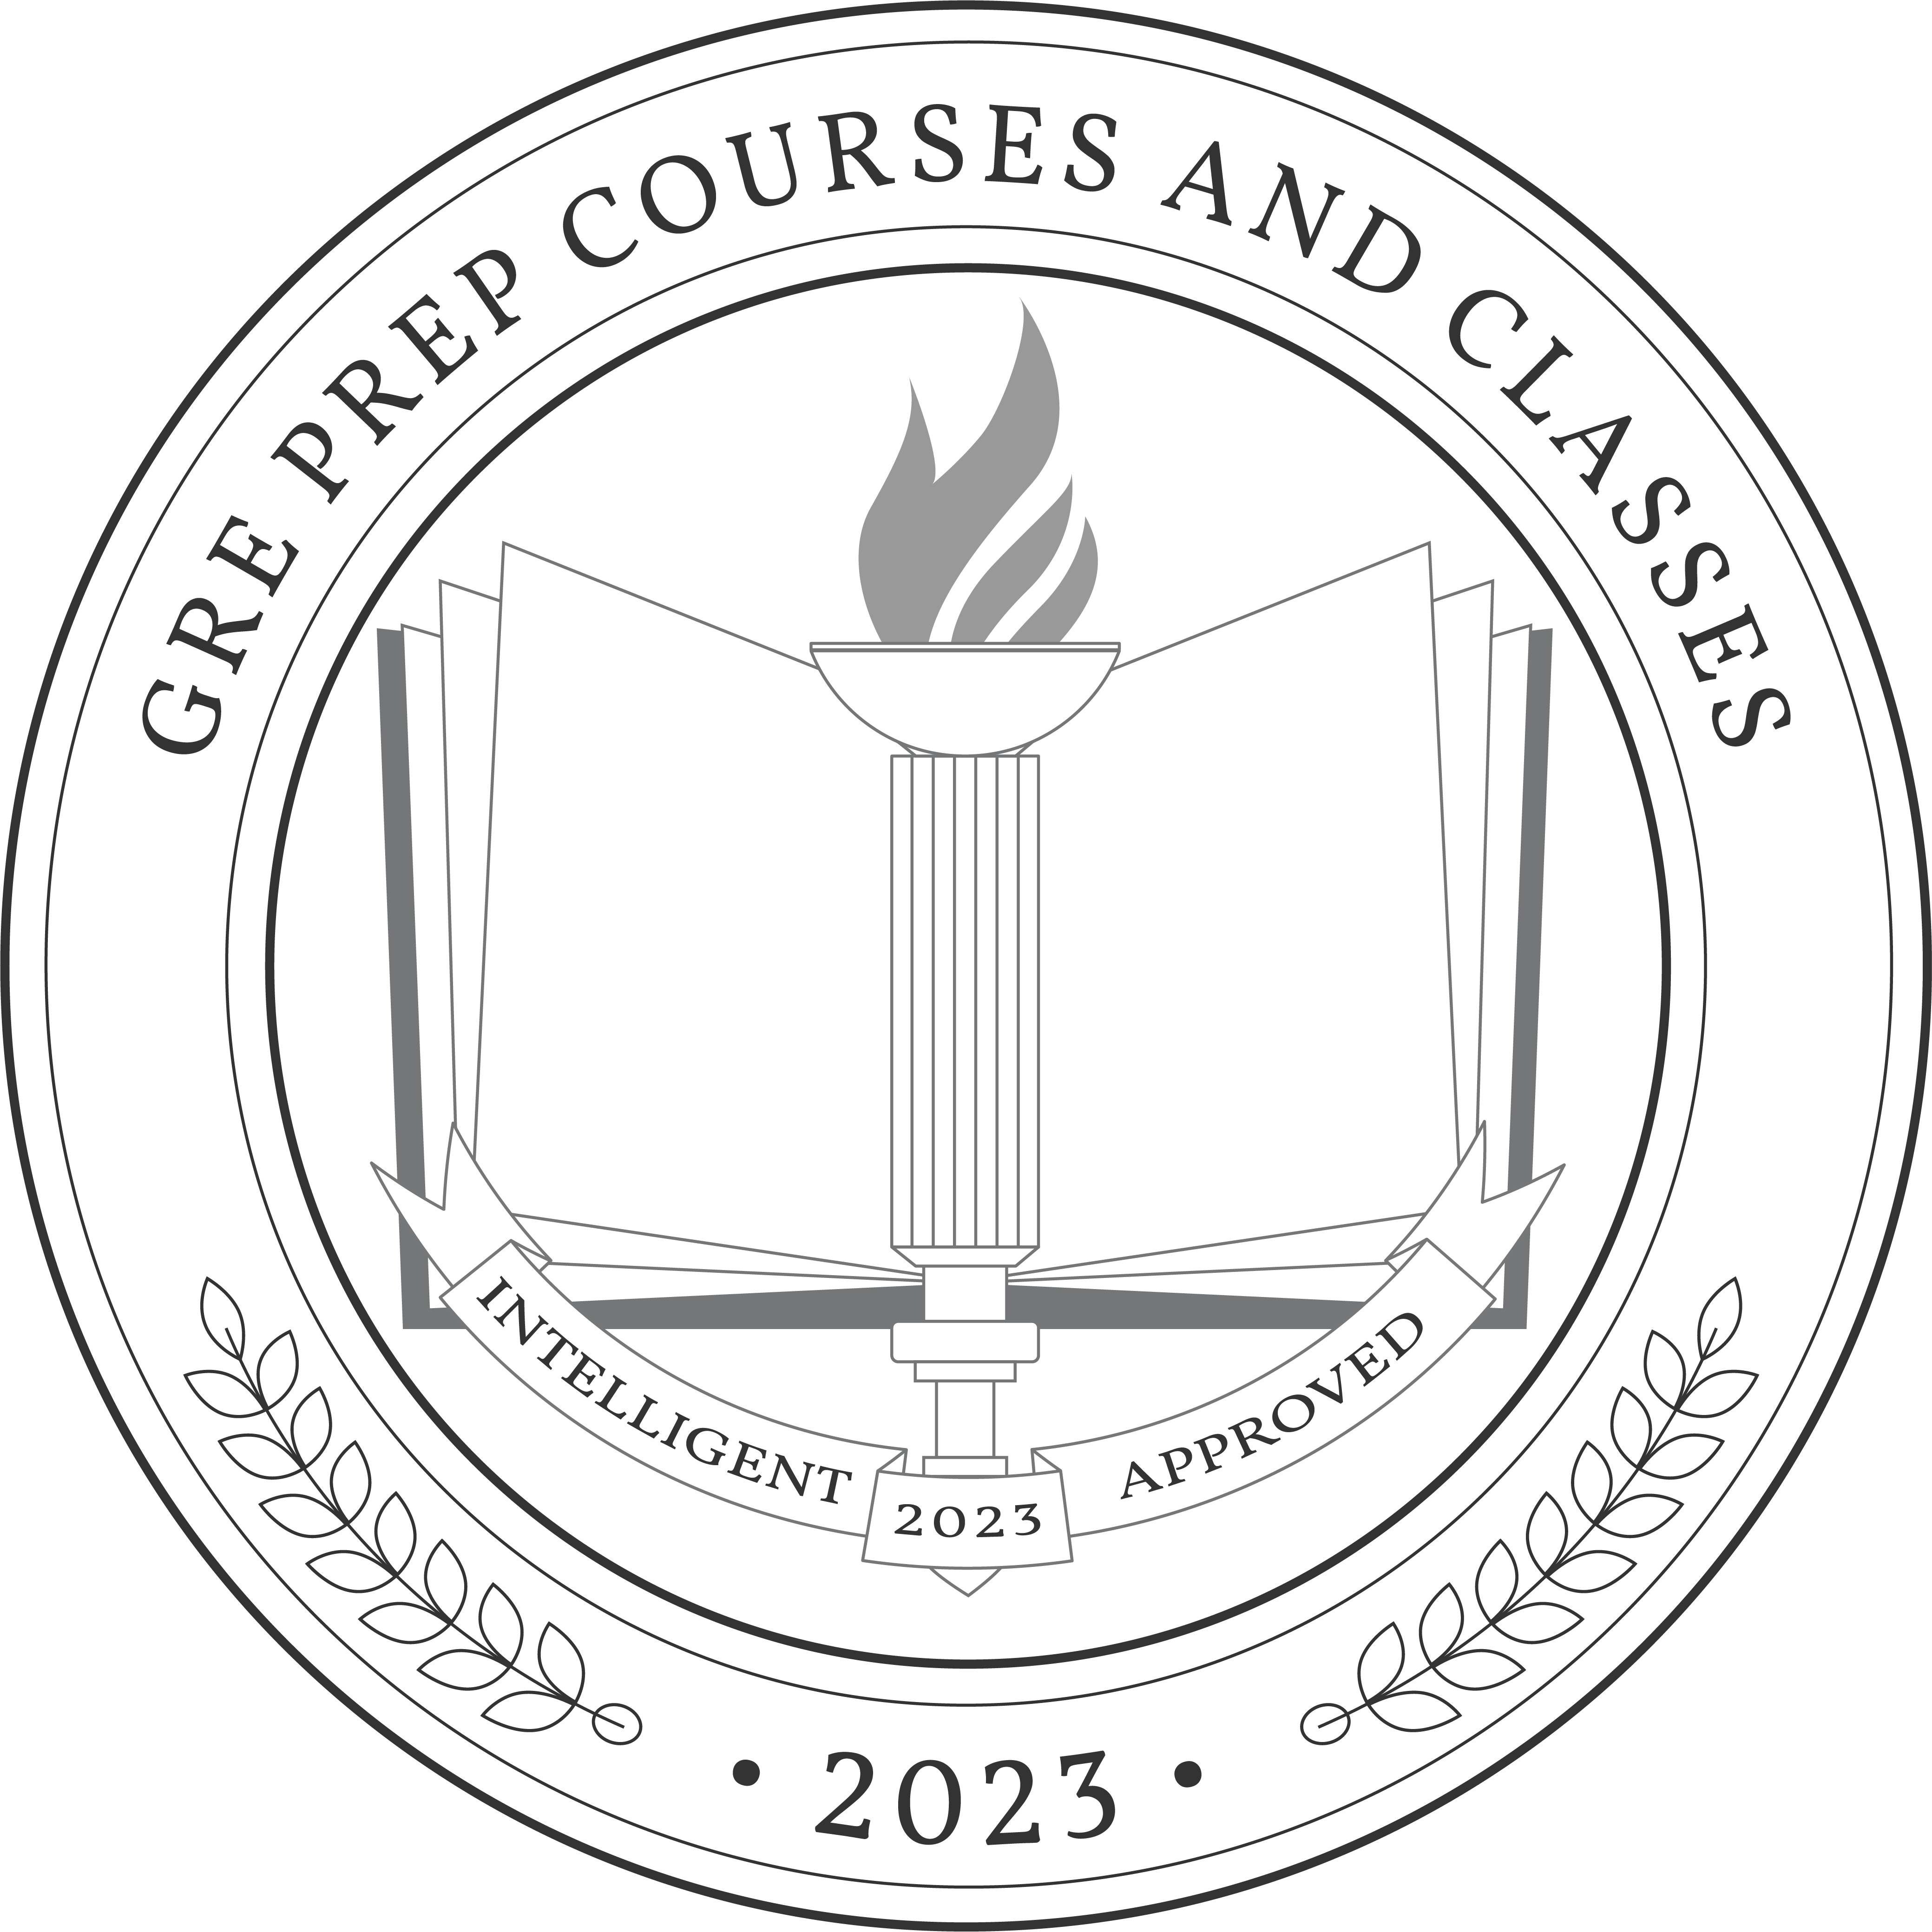 GRE Prep Courses and Classes Badge